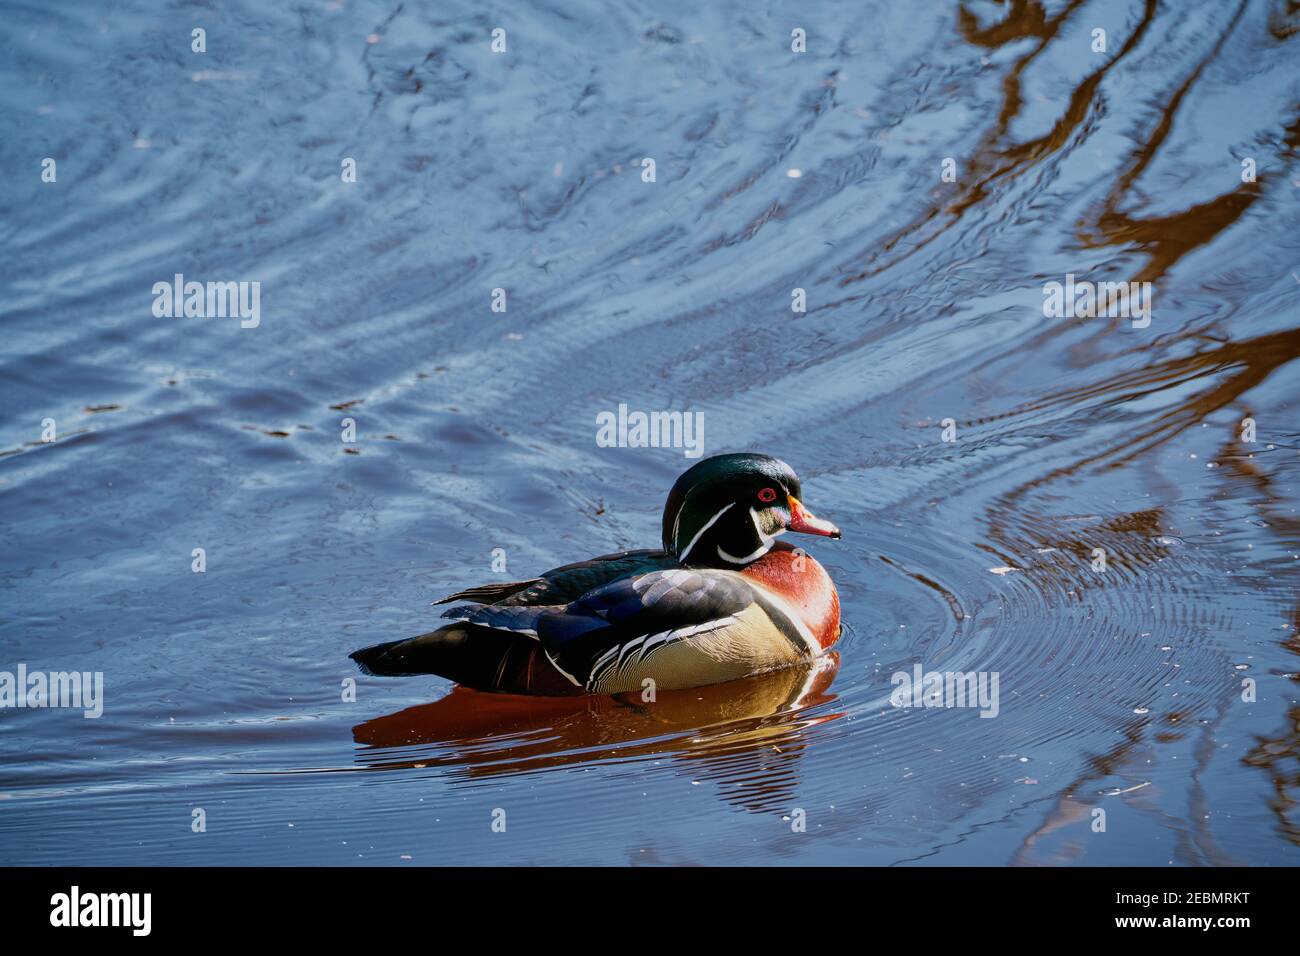 Brightly coloured and striped wood duck swims across blue water of Stanley Park's Lost Lagoon. Stock Photo